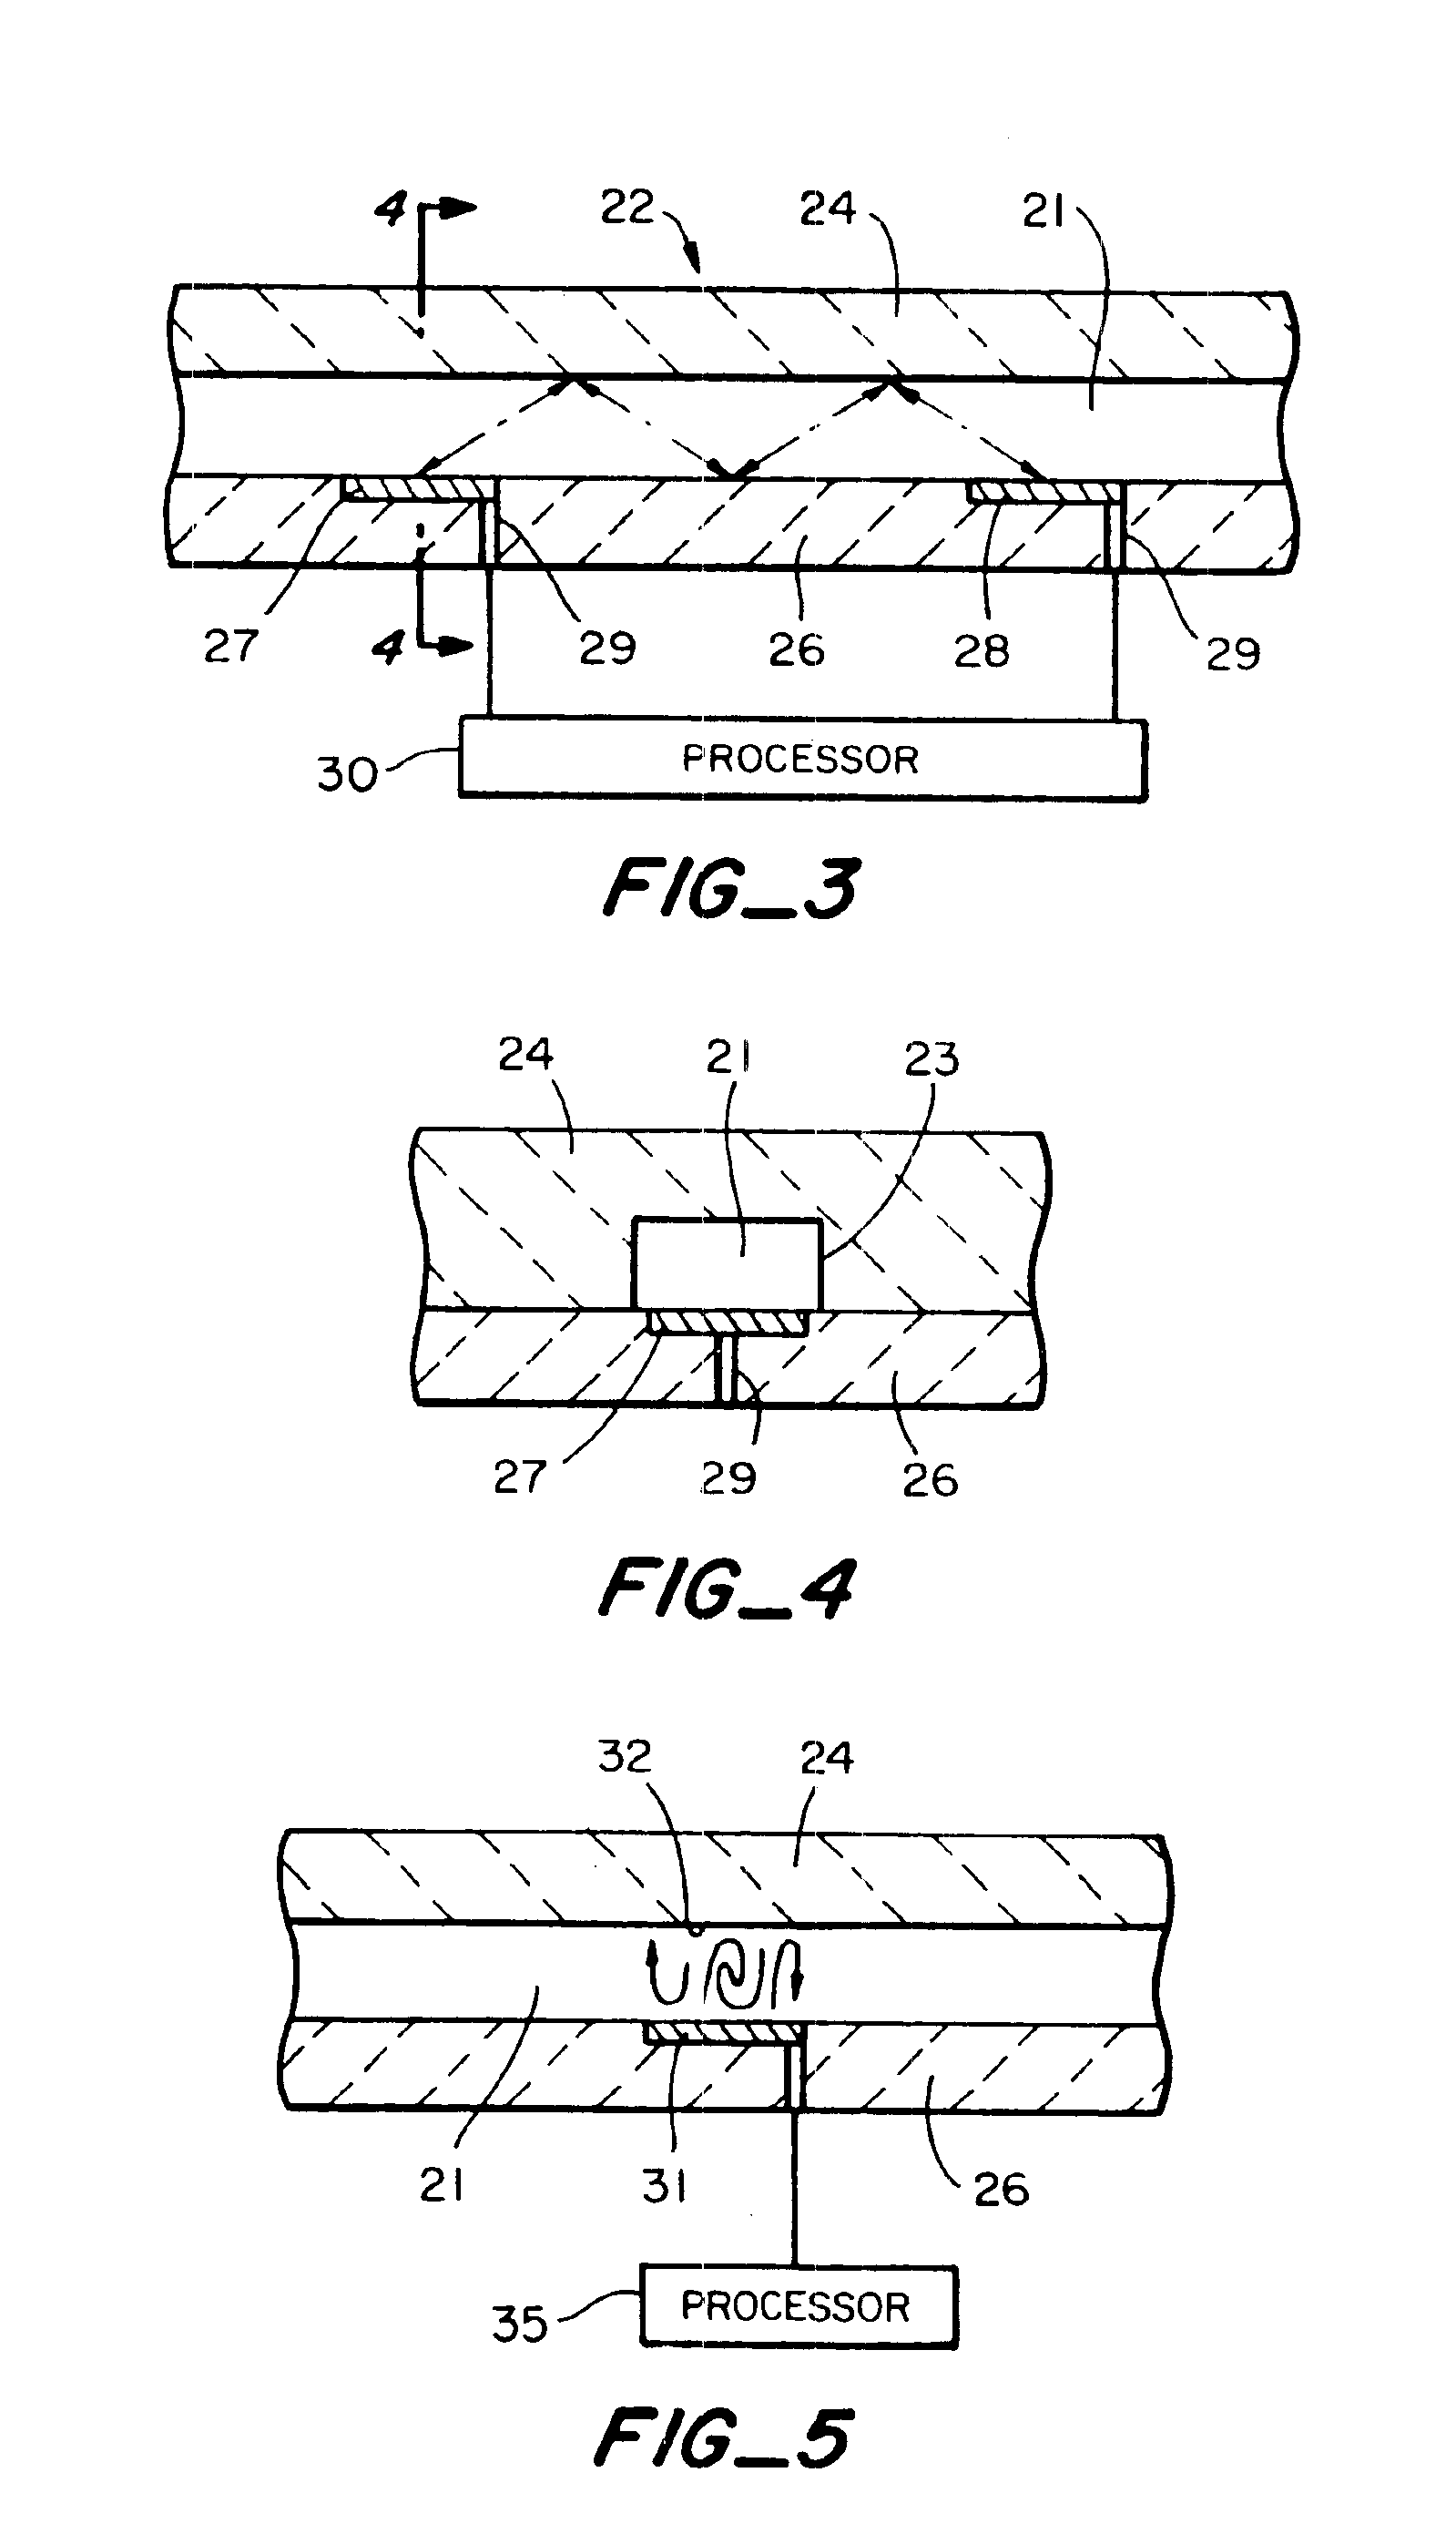 Fluidic device with integrated capacitive micromachined ultrasonic transducers